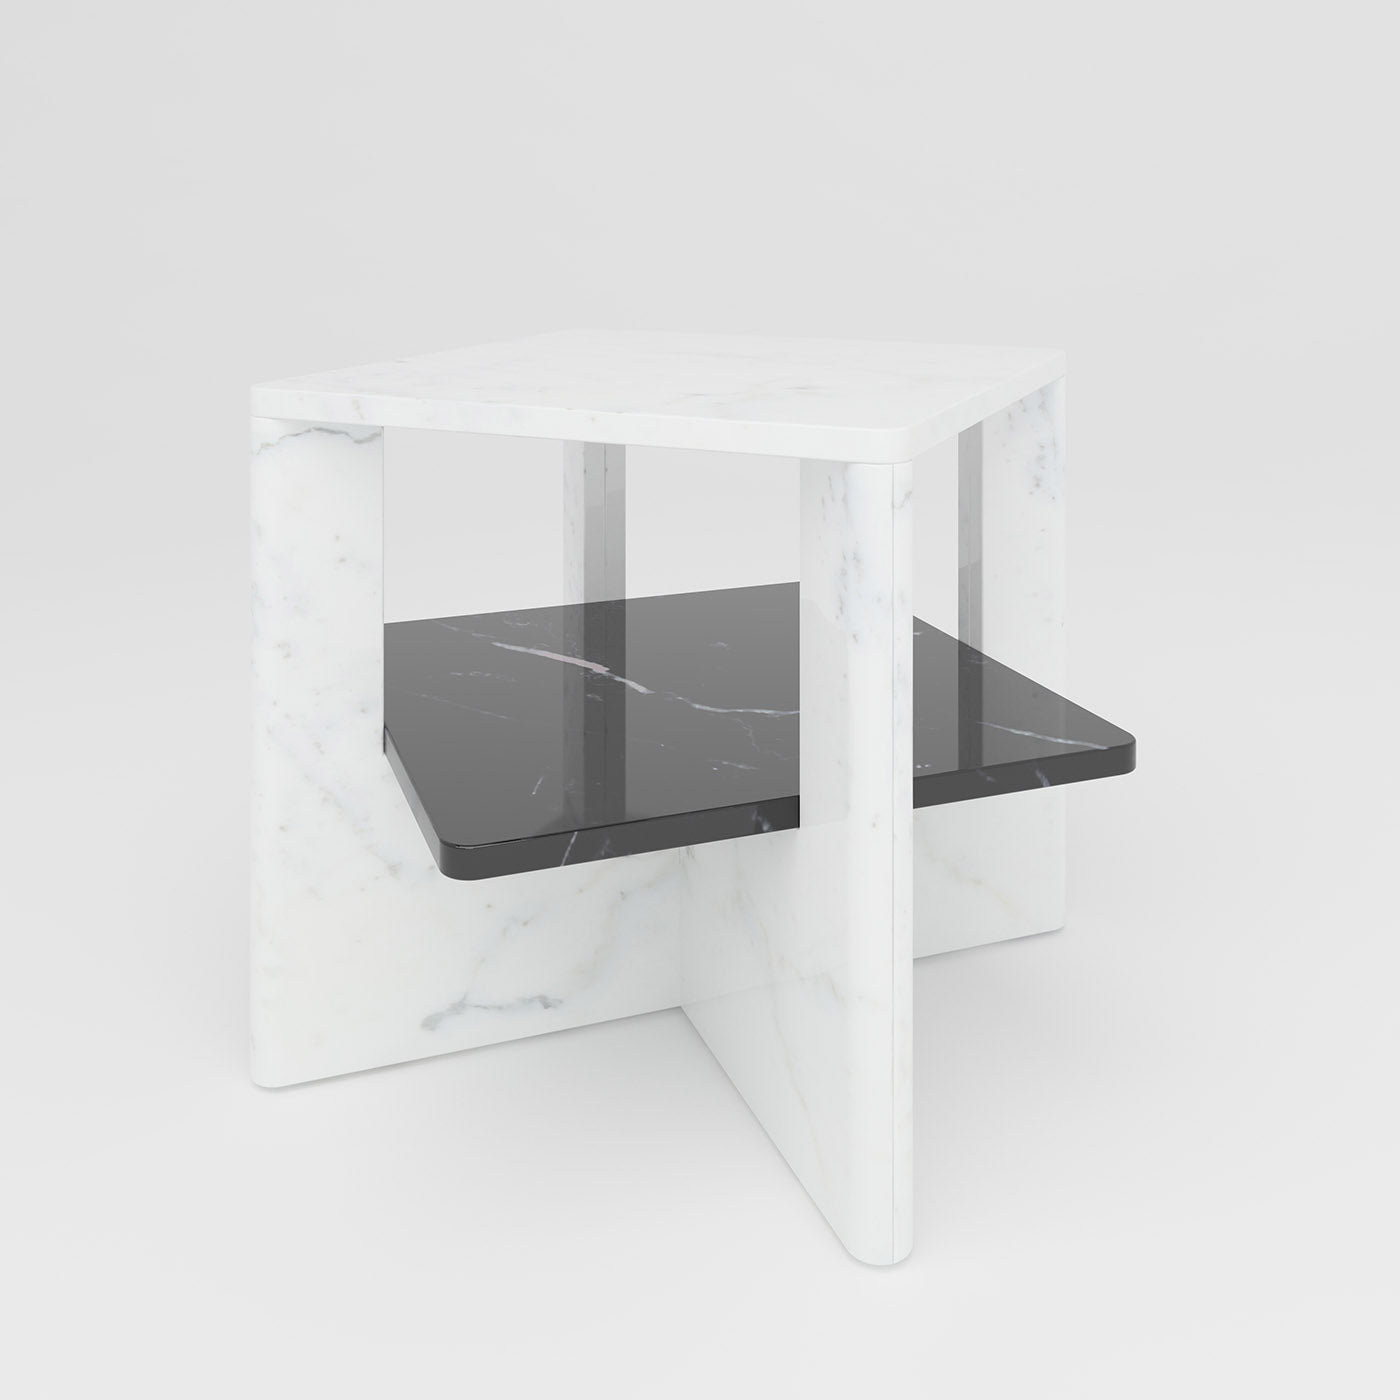 Plus+Double Marble Coffee Table #2 - Alternative view 1